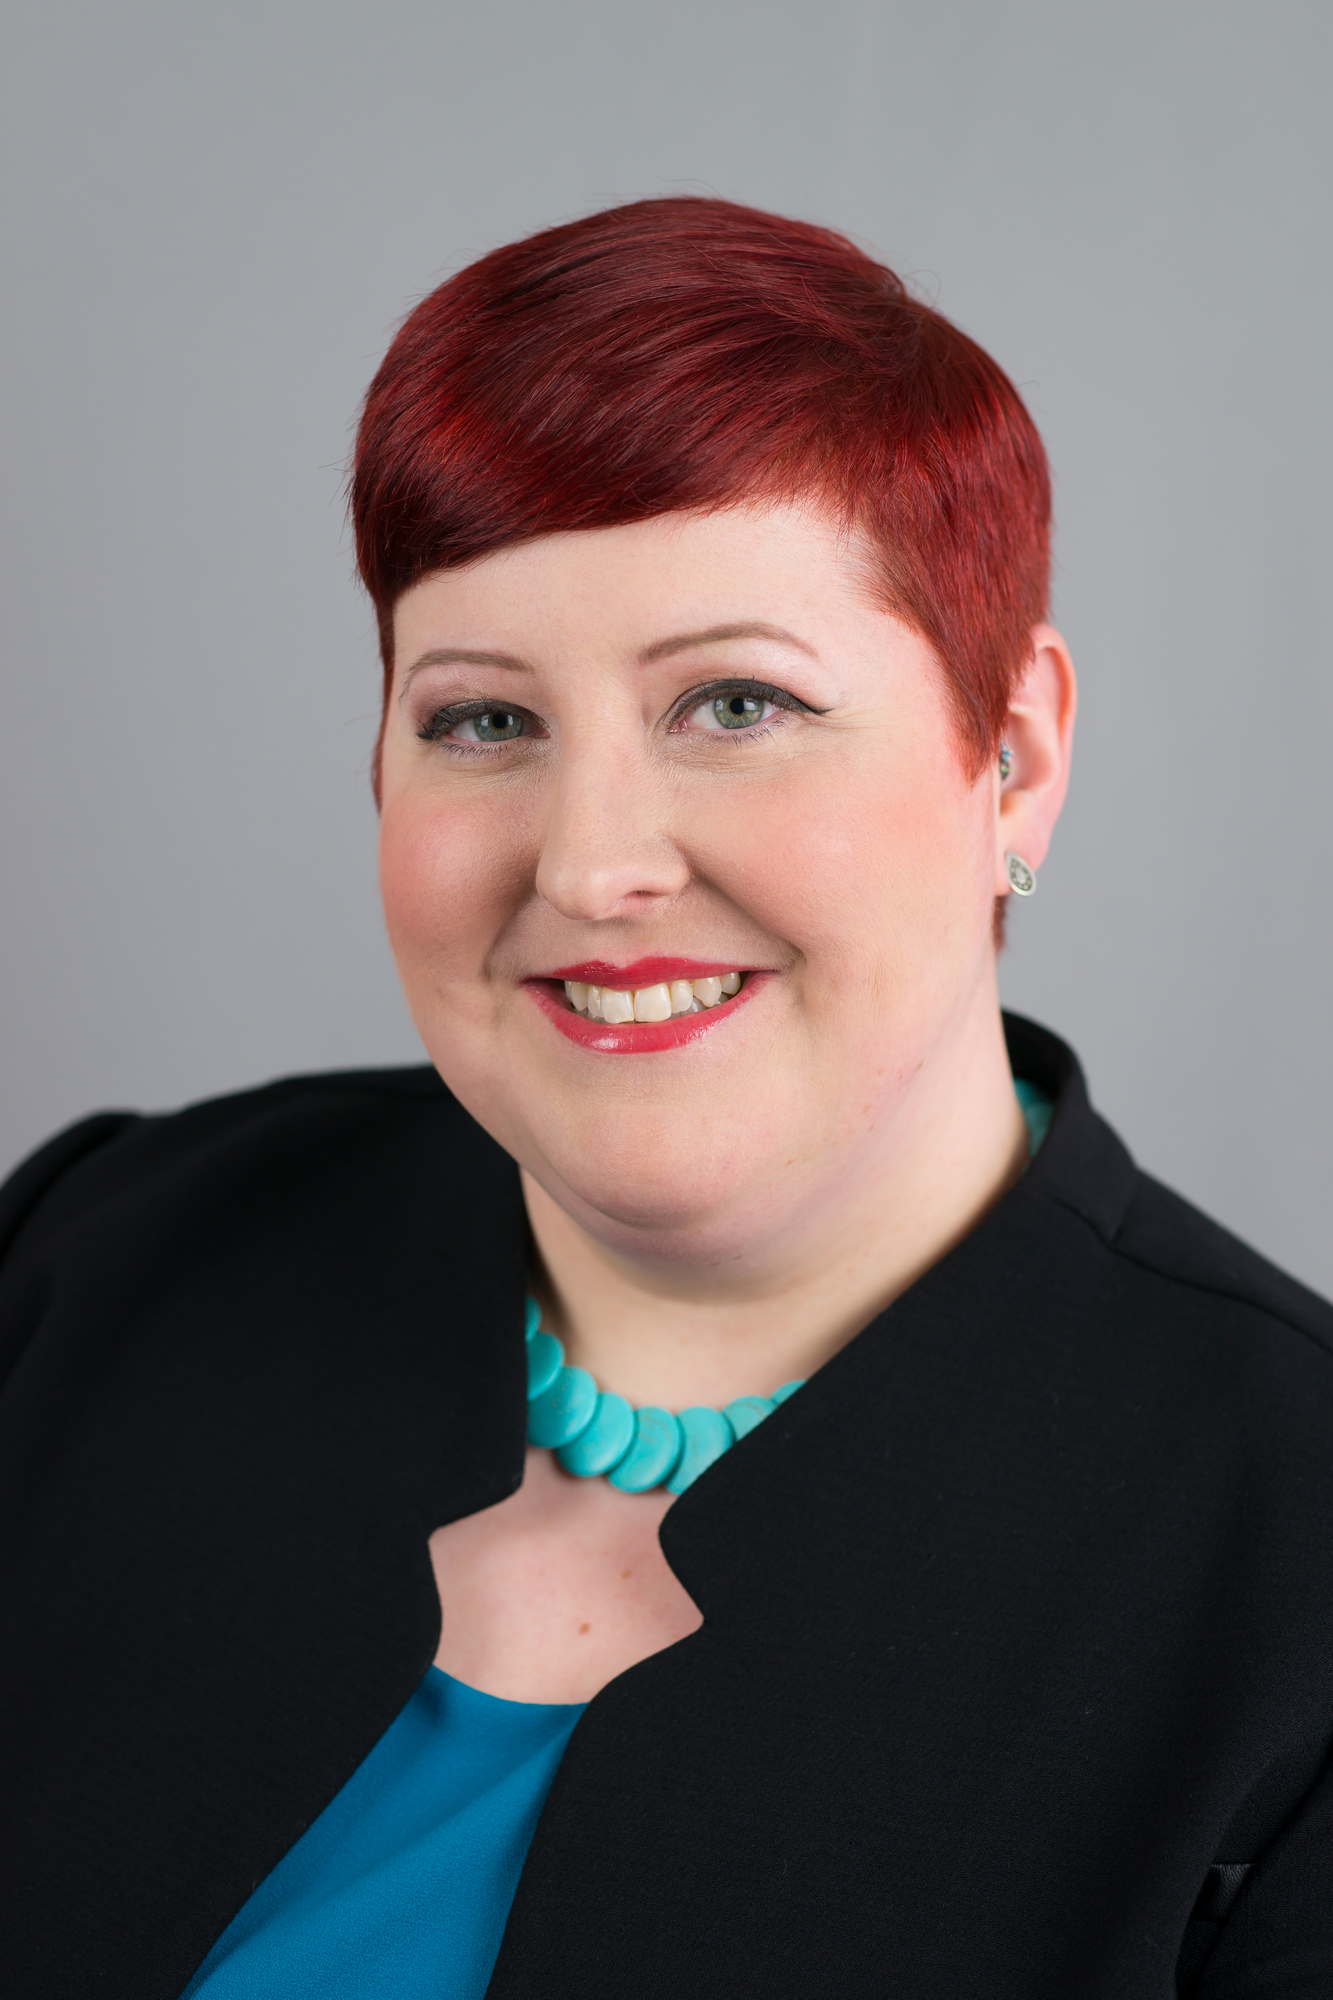 A fat woman with red hair and red lipstick smiles confidently at the camera for a business headshot